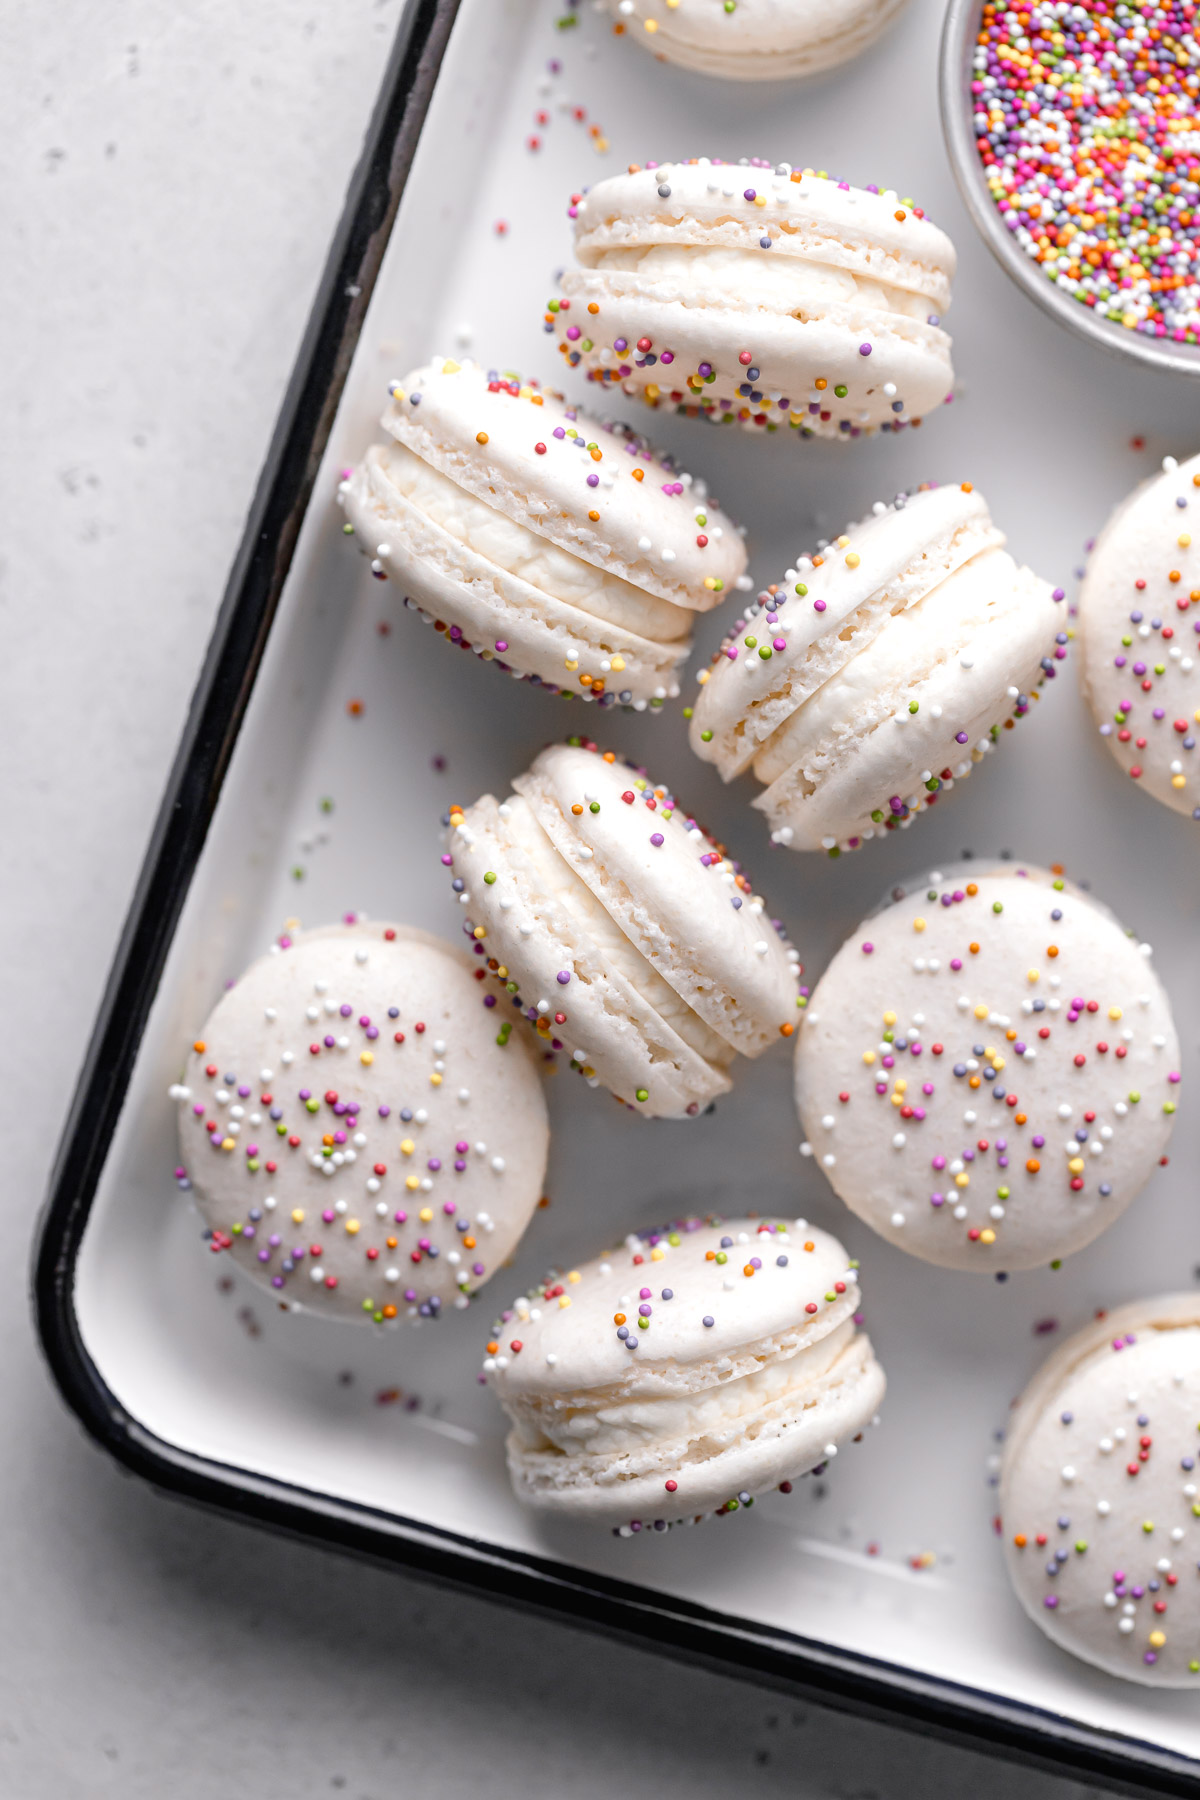 birthday cake macarons with rainbow sprinkles and whipped cream cheese frosting arranged in white tray.